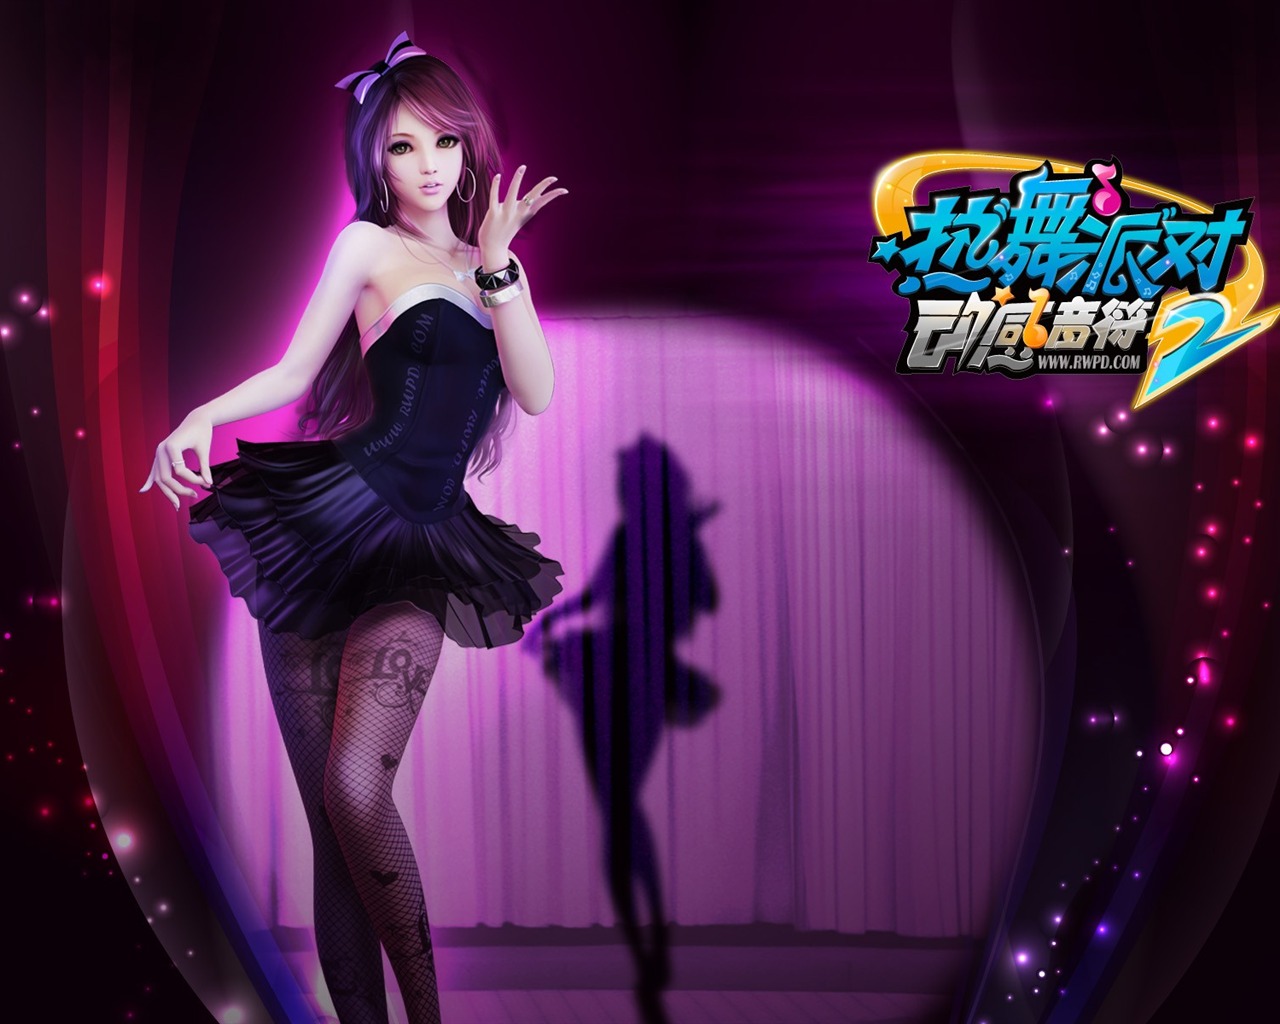 Online game Hot Dance Party II official wallpapers #29 - 1280x1024